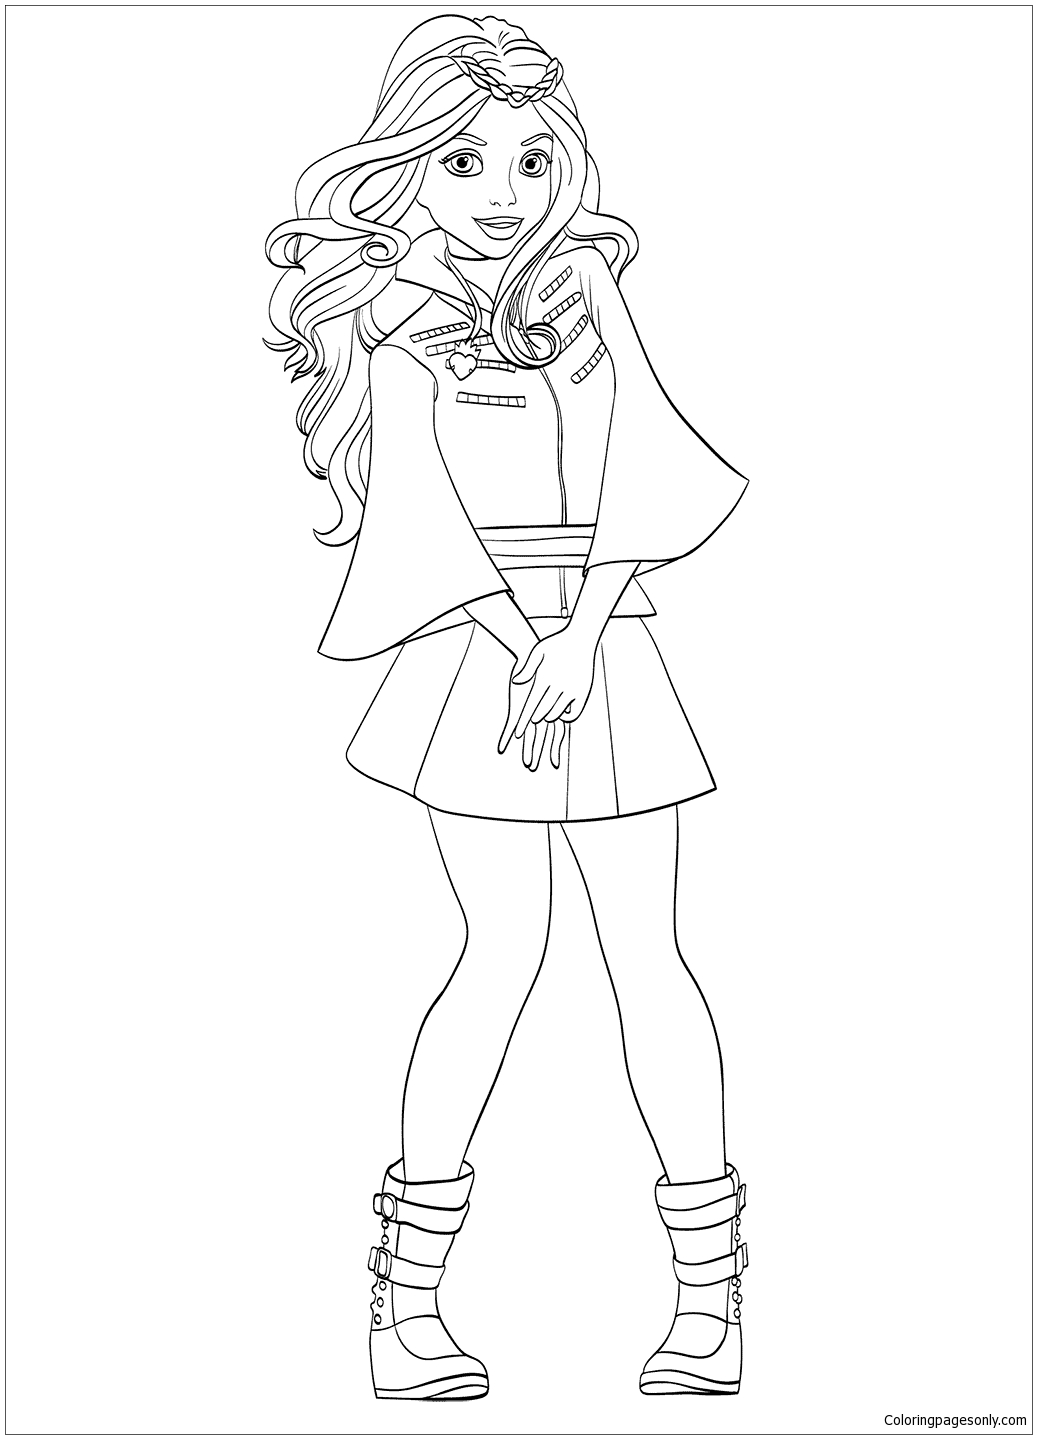 evie from descendants coloring pages descendants coloring pages coloring pages for kids and adults